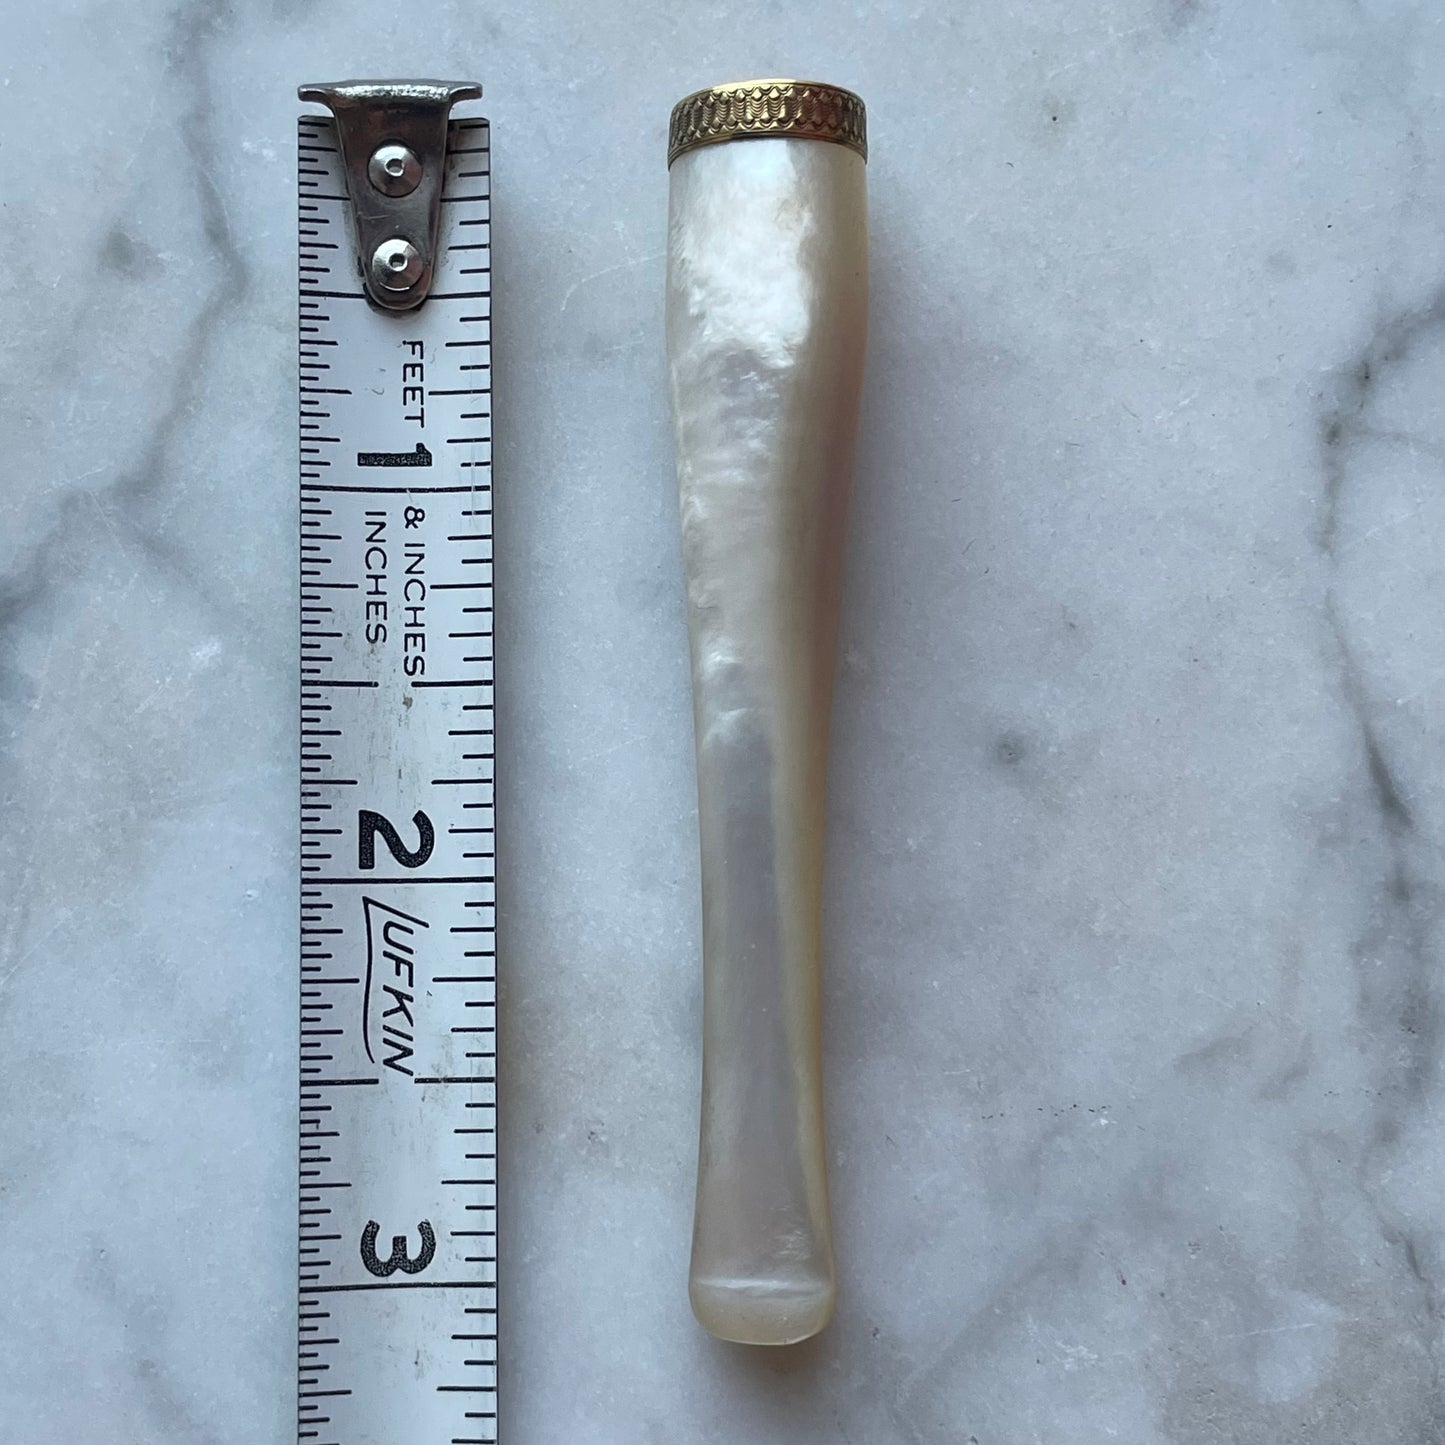 Antique Pearl & Gold Cigarette Holder with Original Case | Diplomat of London